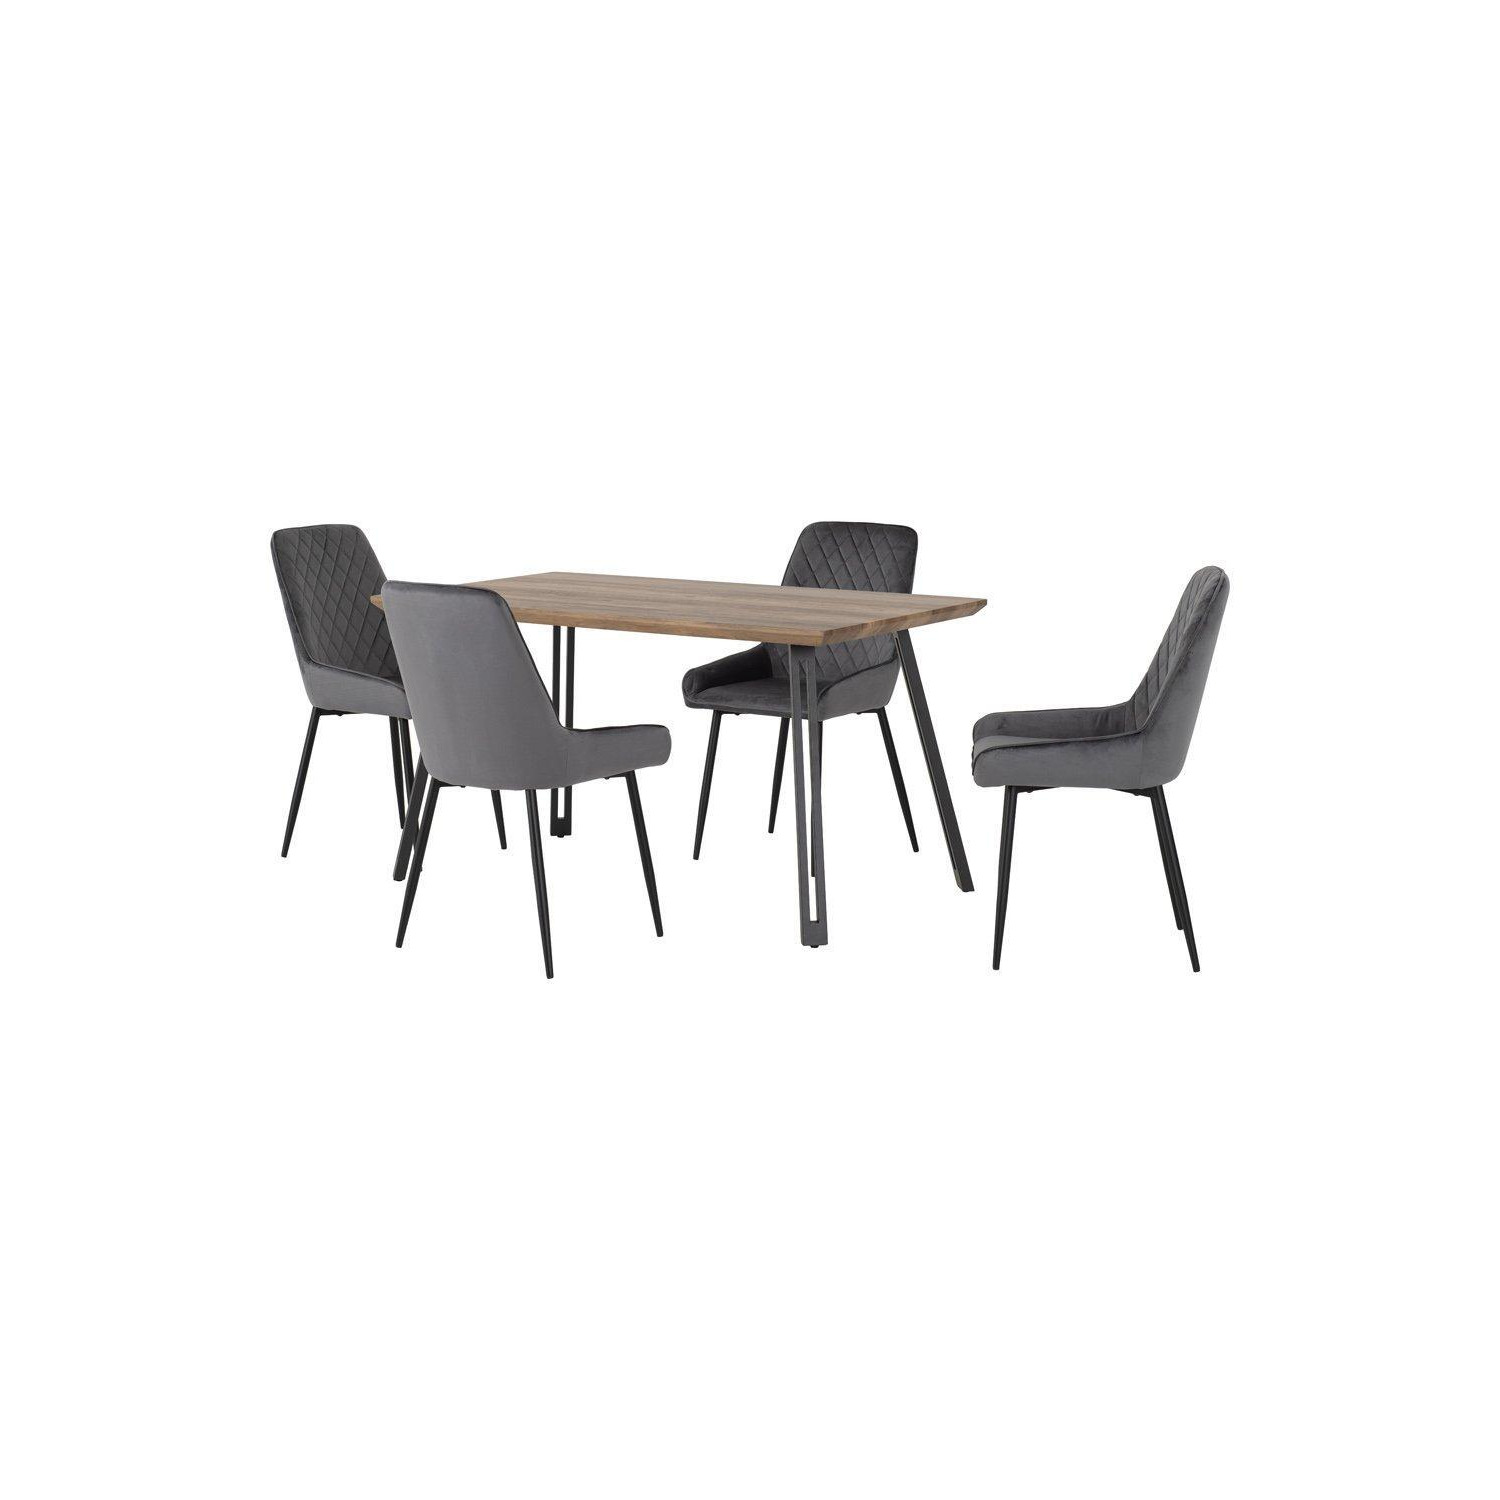 Quebec Straight Edge Dining Set with Avery Chairs - image 1